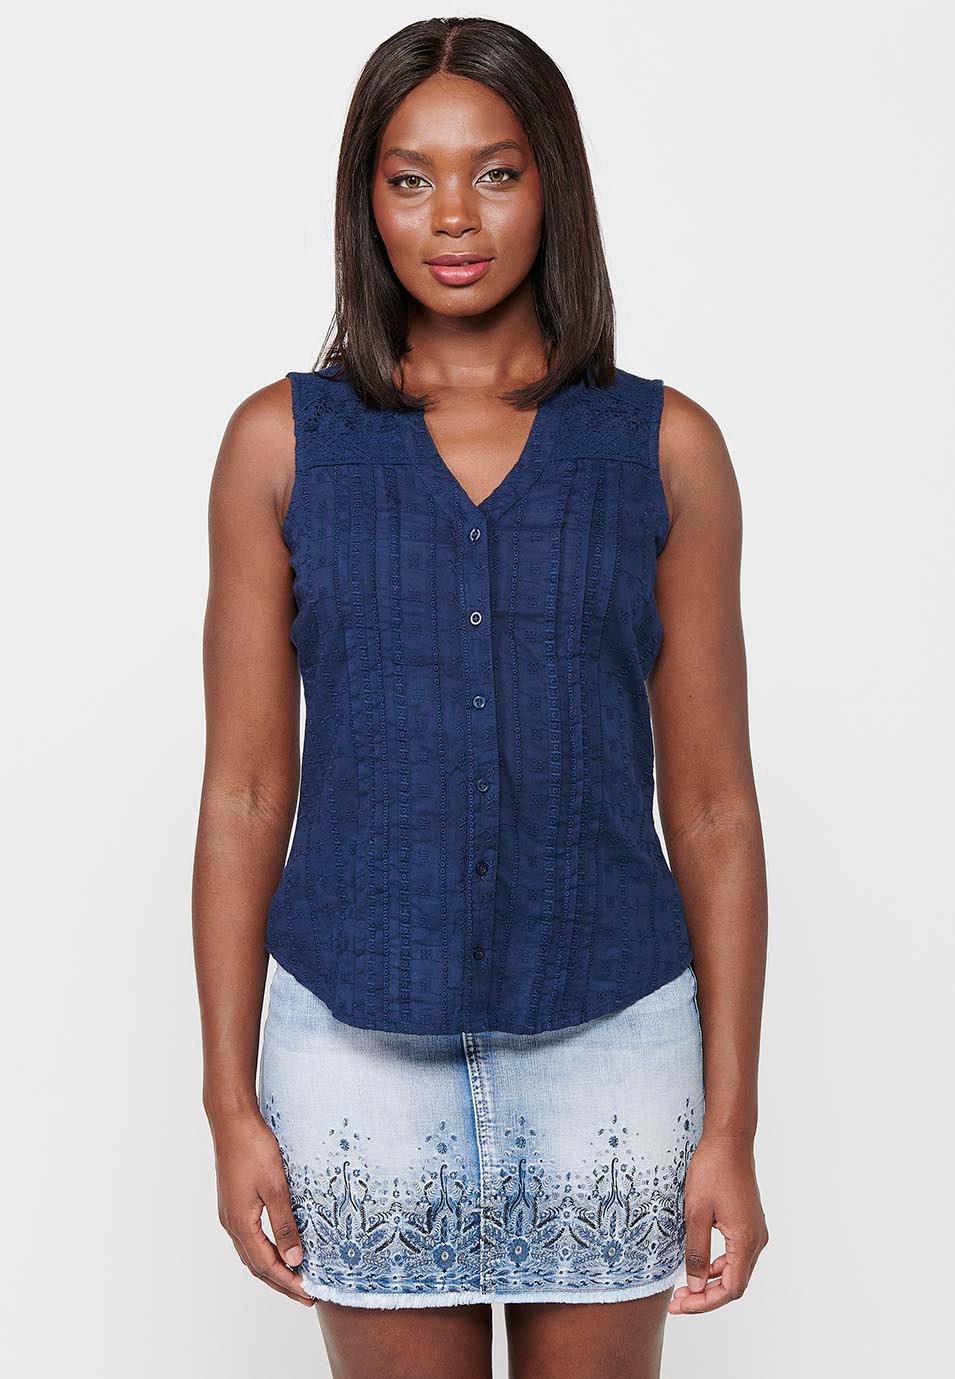 Embroidered Fabric Sleeveless Blouse with V-Neckline and Front Closure with Navy Color Buttons for Women 1